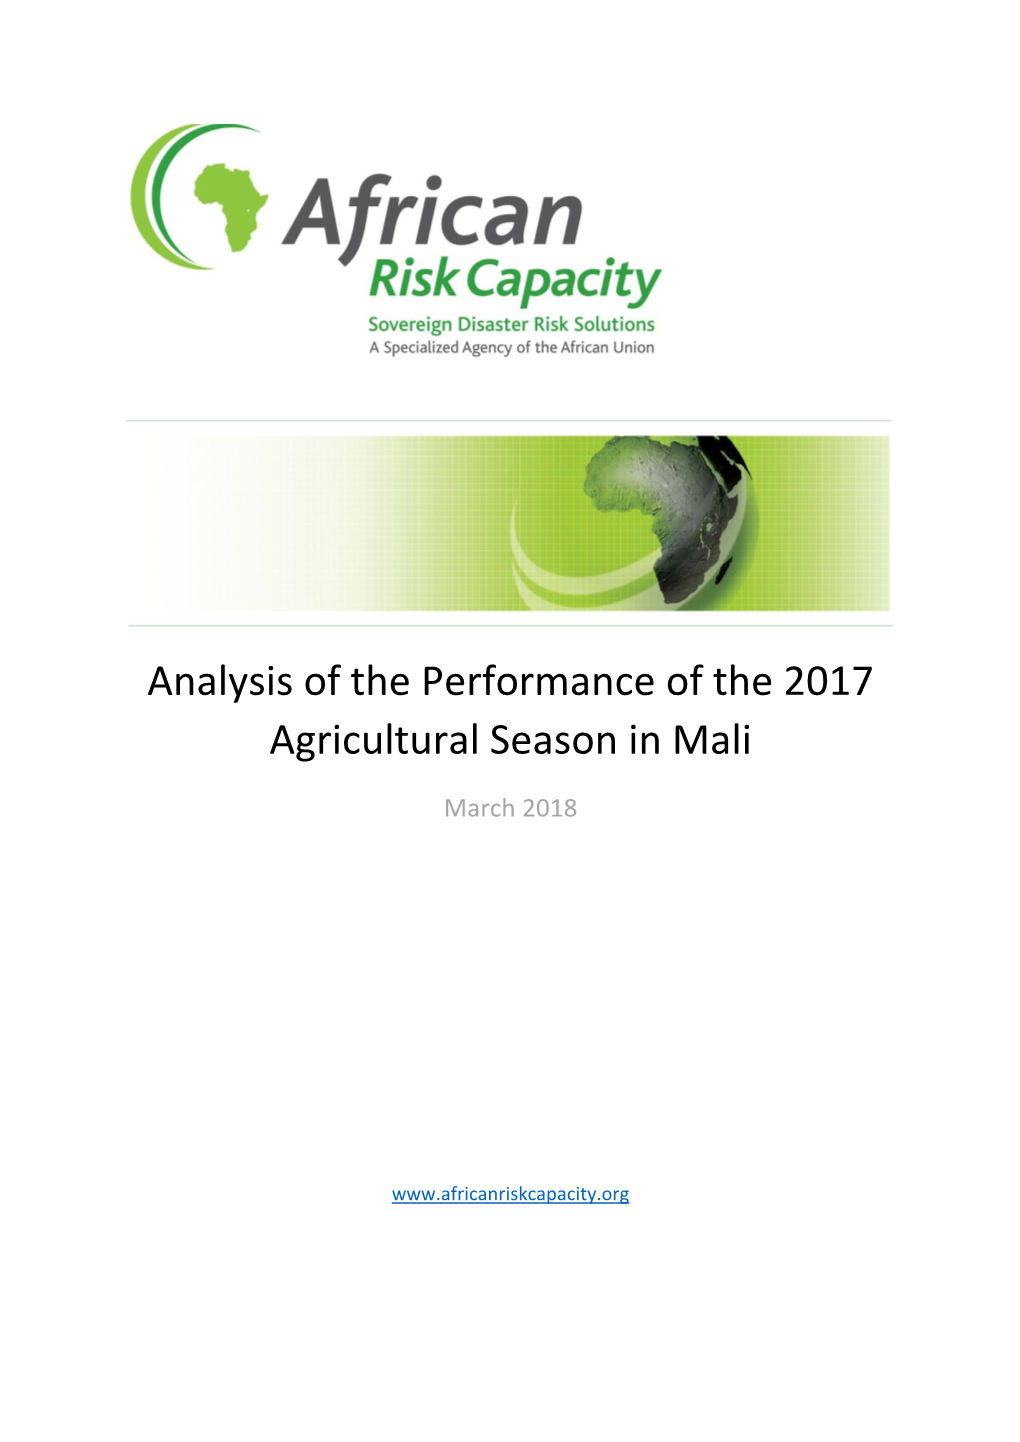 Analysis of the Performance of the 2017 Agricultural Season in Mali